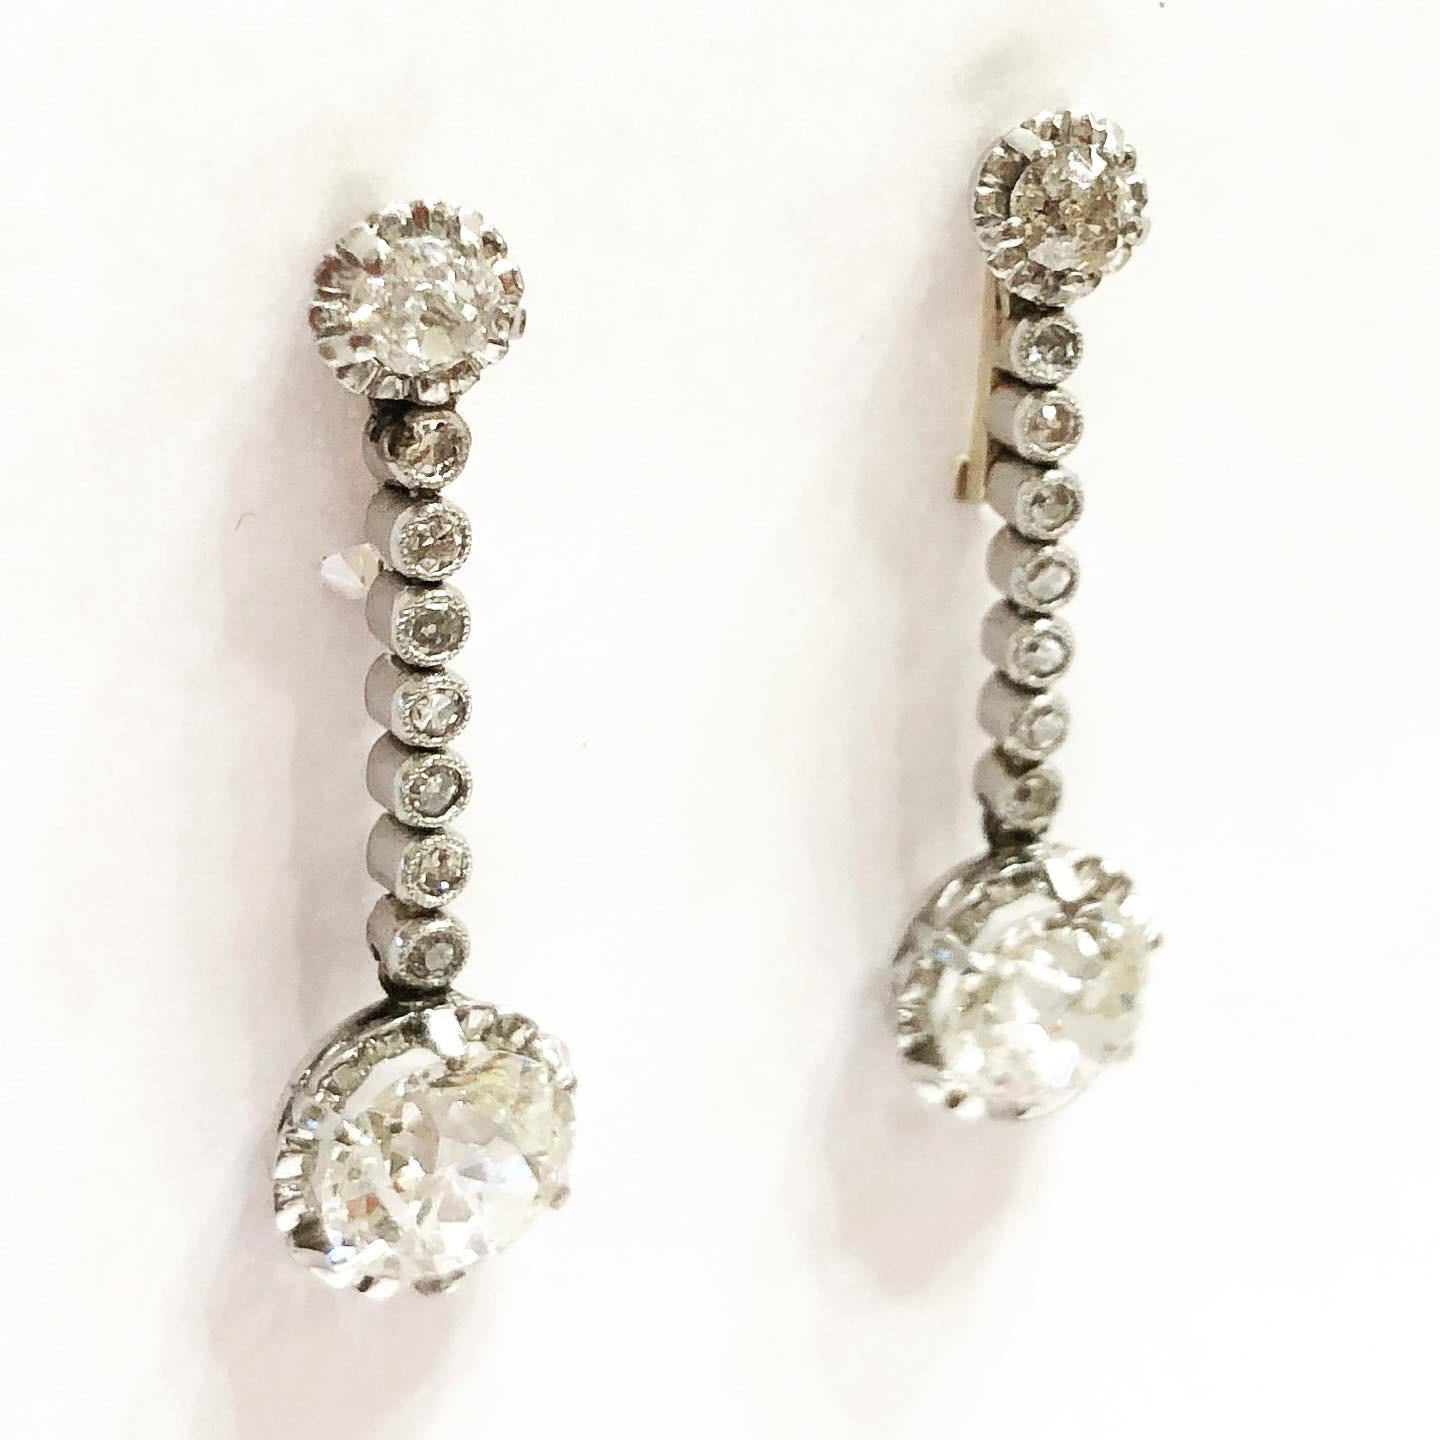 Belle epoque 1930s diamonds platinum yellow gold dangle earrings.
Earrings in platinum and 18 karats yellow gold.
Lovely antique earrings, they are composed of a line of old European cut diamonds which retains in pendent an antique brilliant- cut